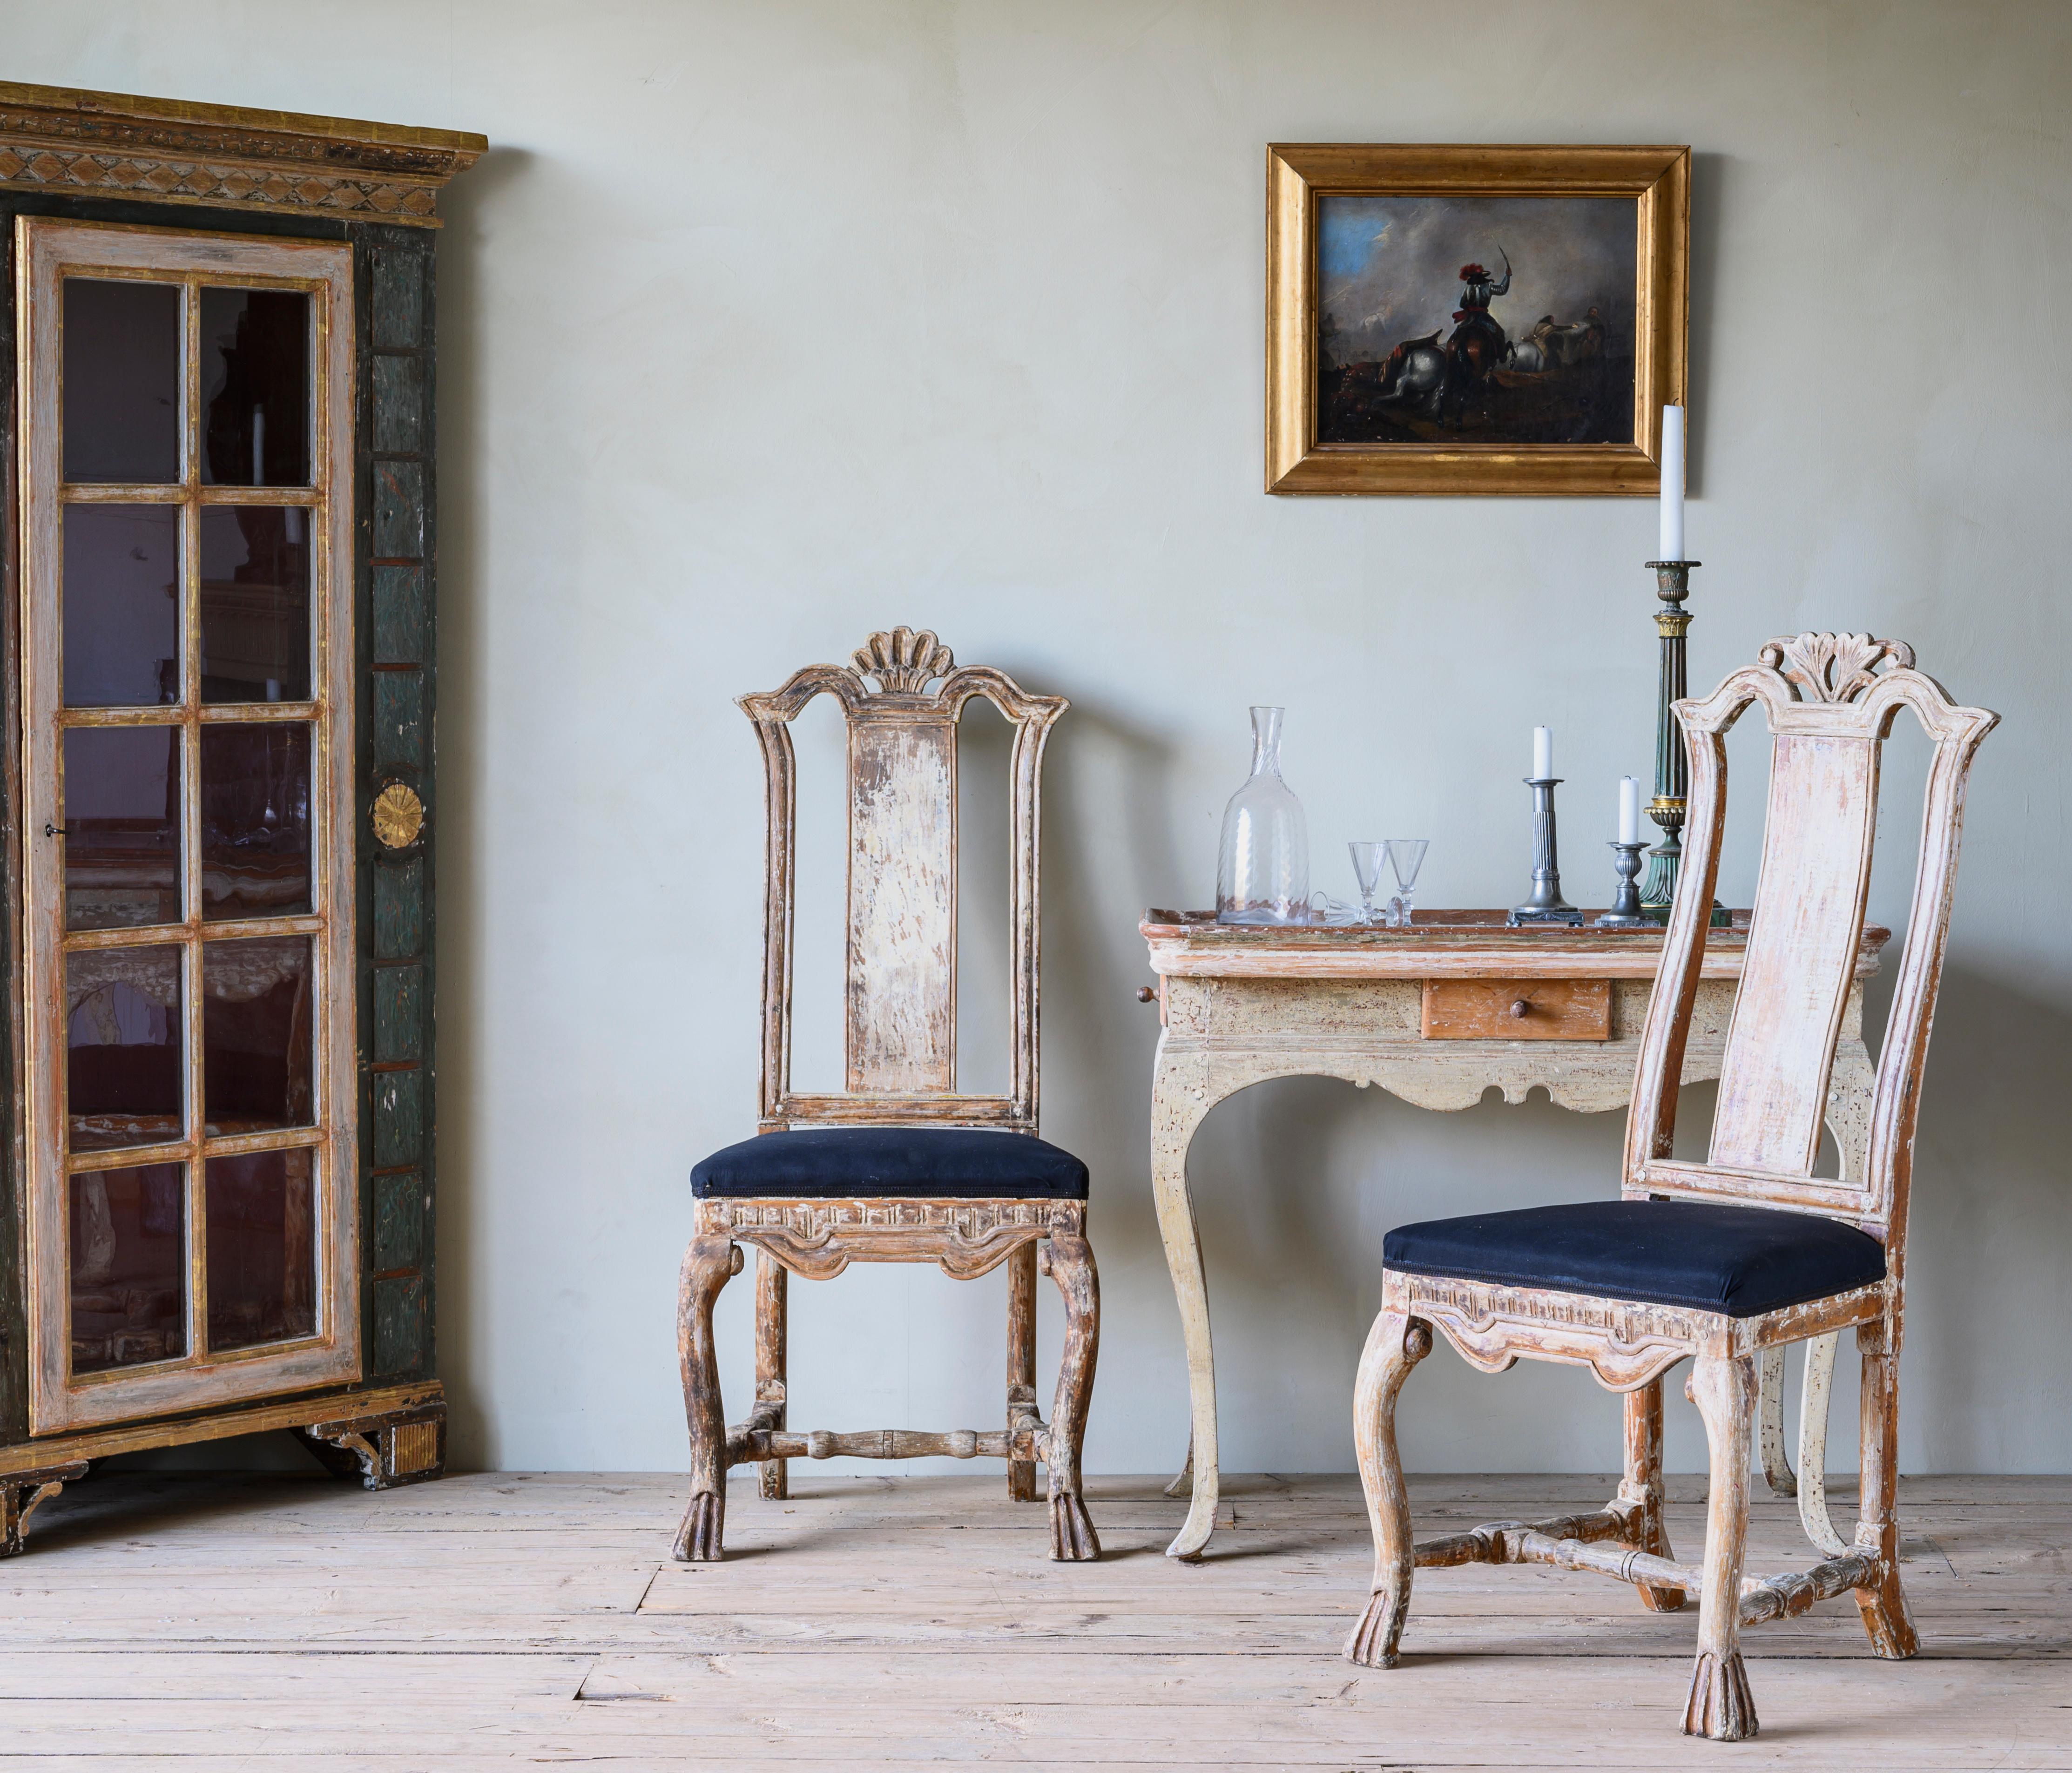 Good pair of 18th century Swedish Baroque chairs in their original color with great patination, circa 1750.